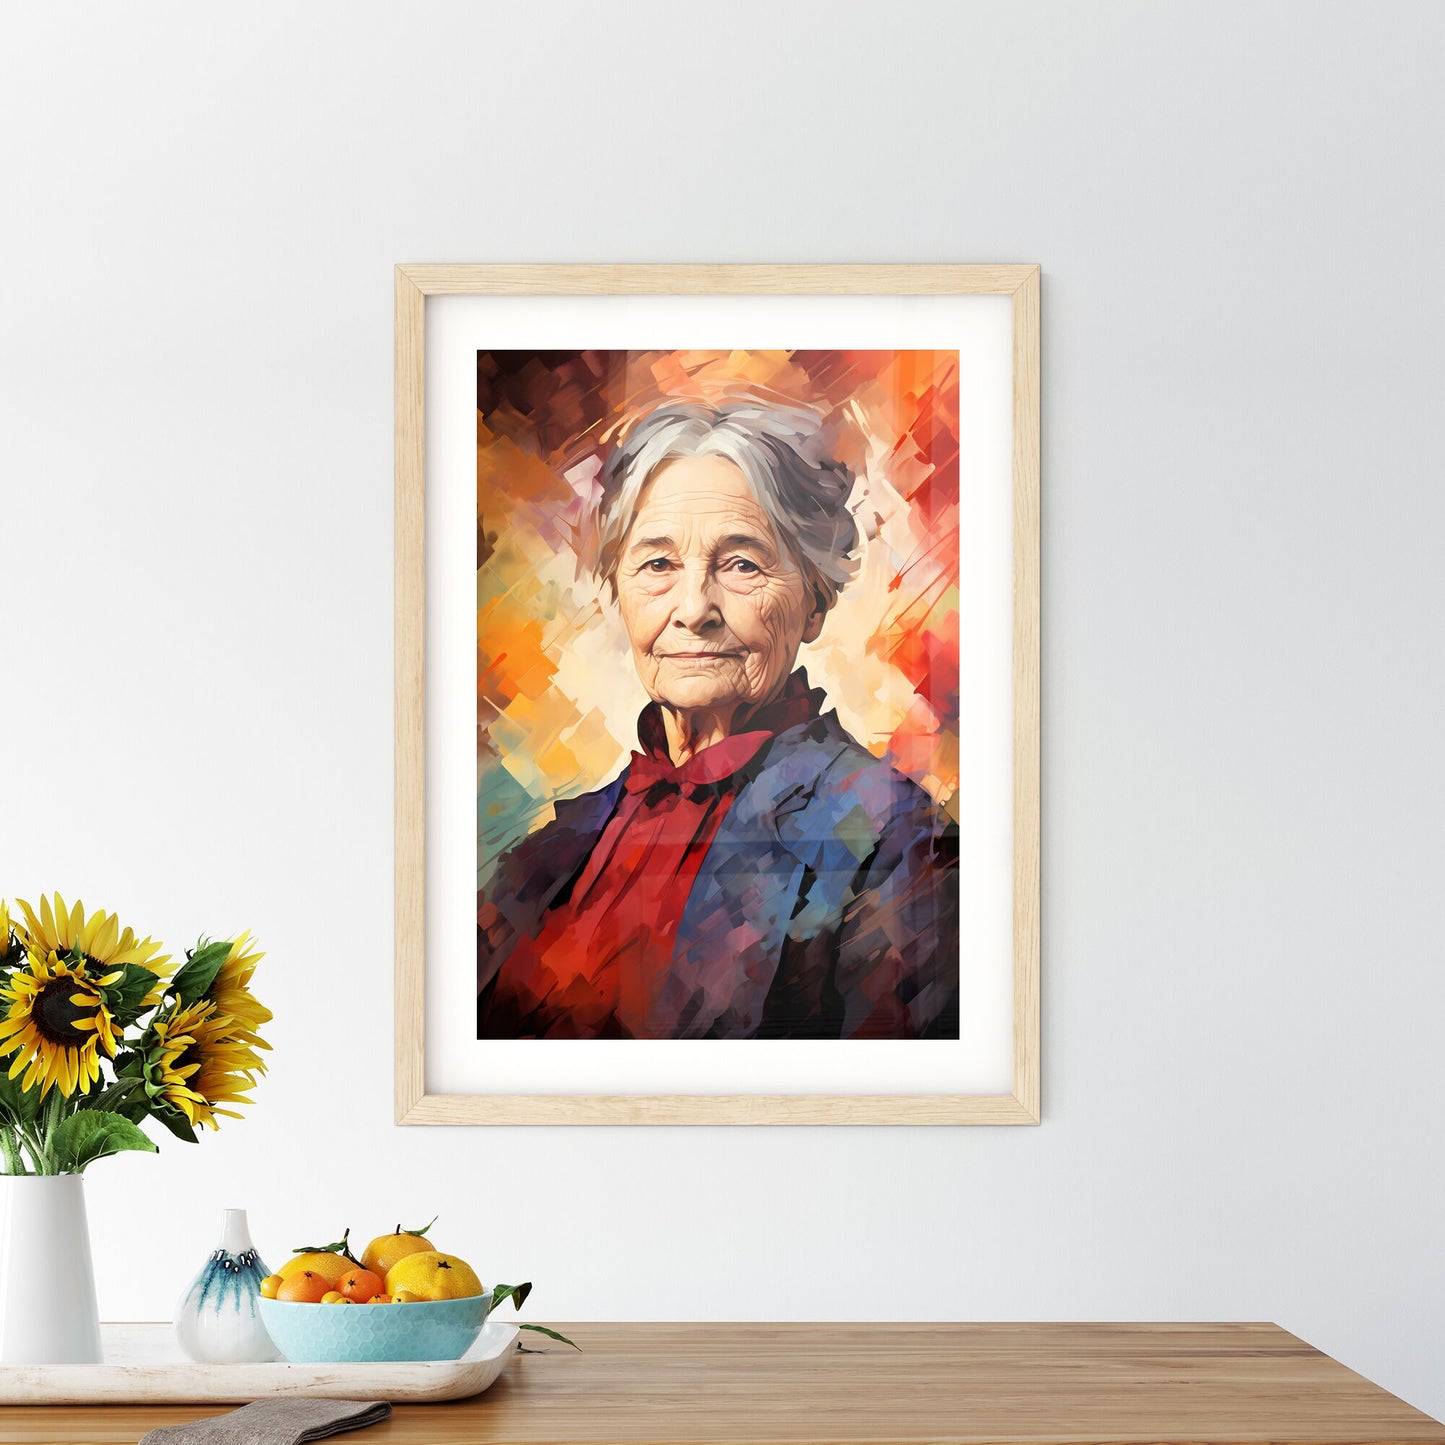 Beatrix Potter - A Woman With Grey Hair And Red Shirt Default Title